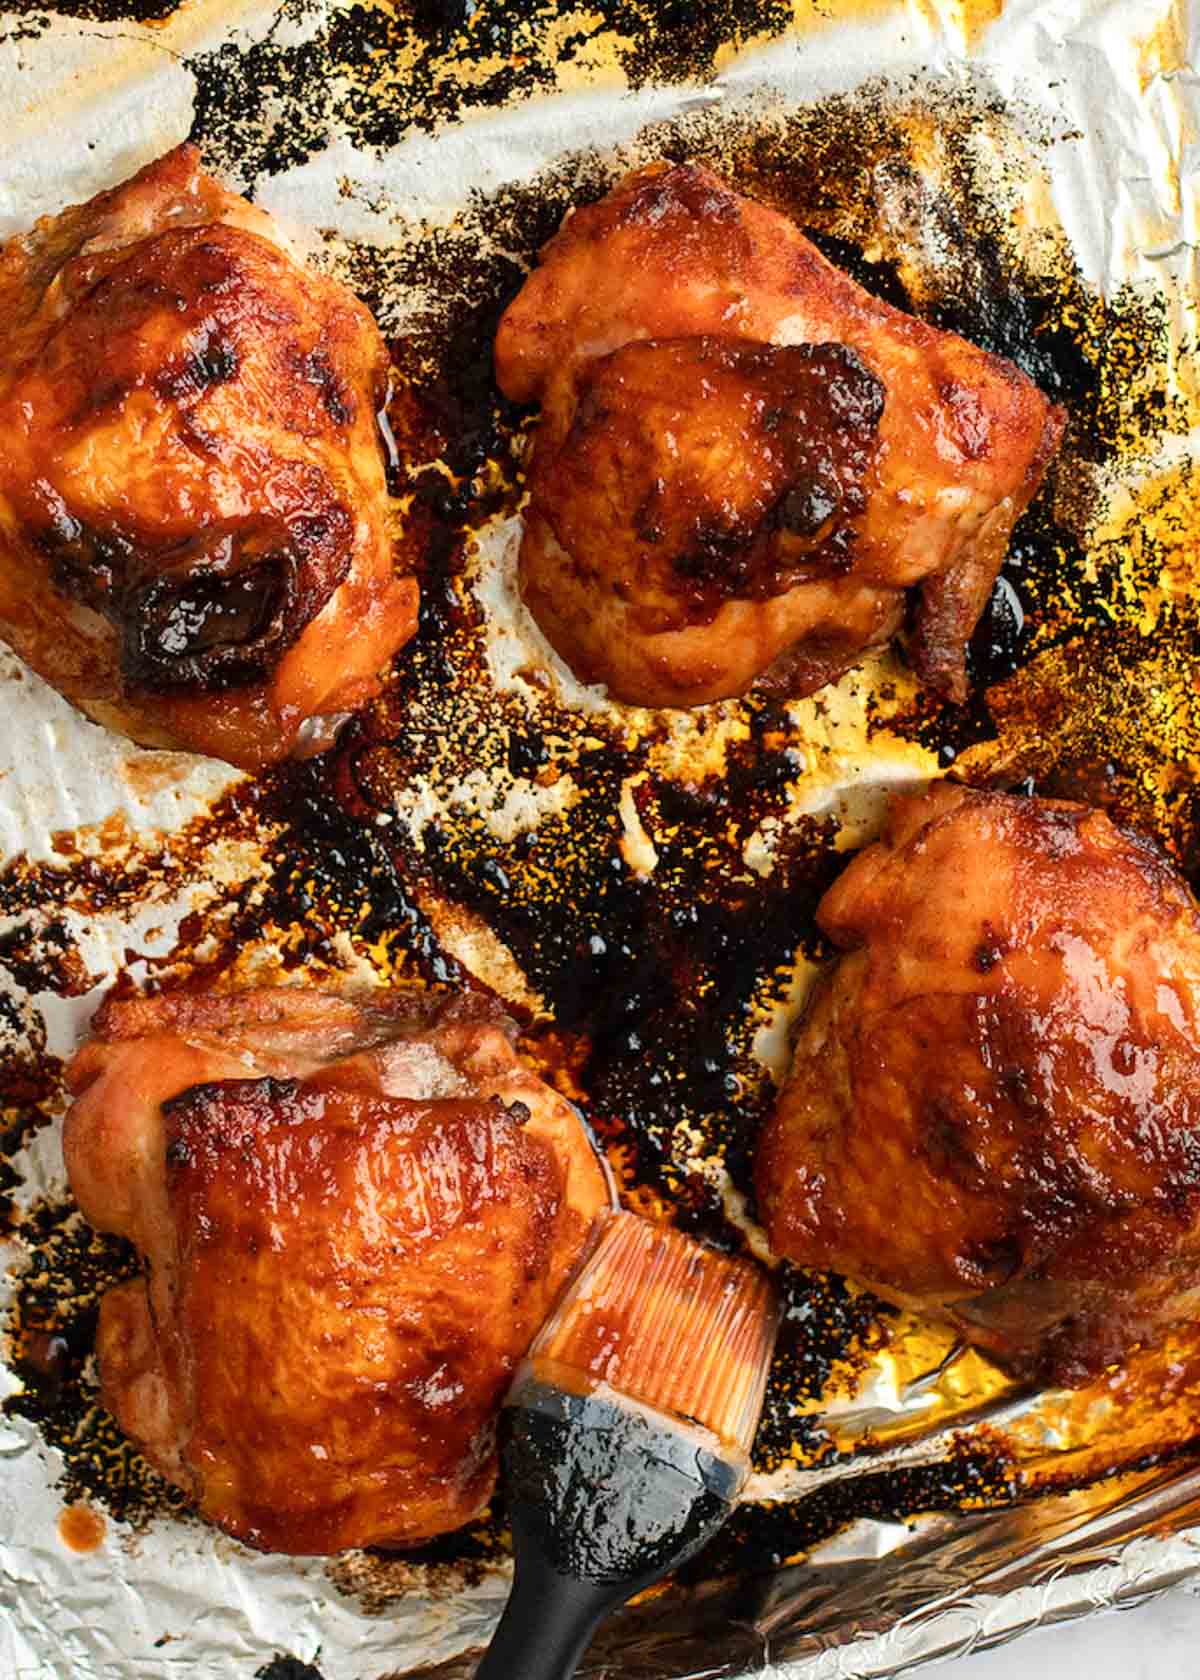 homemade barbecue sauce being brushed onto baked chicken thighs on a foil-lined baking pan